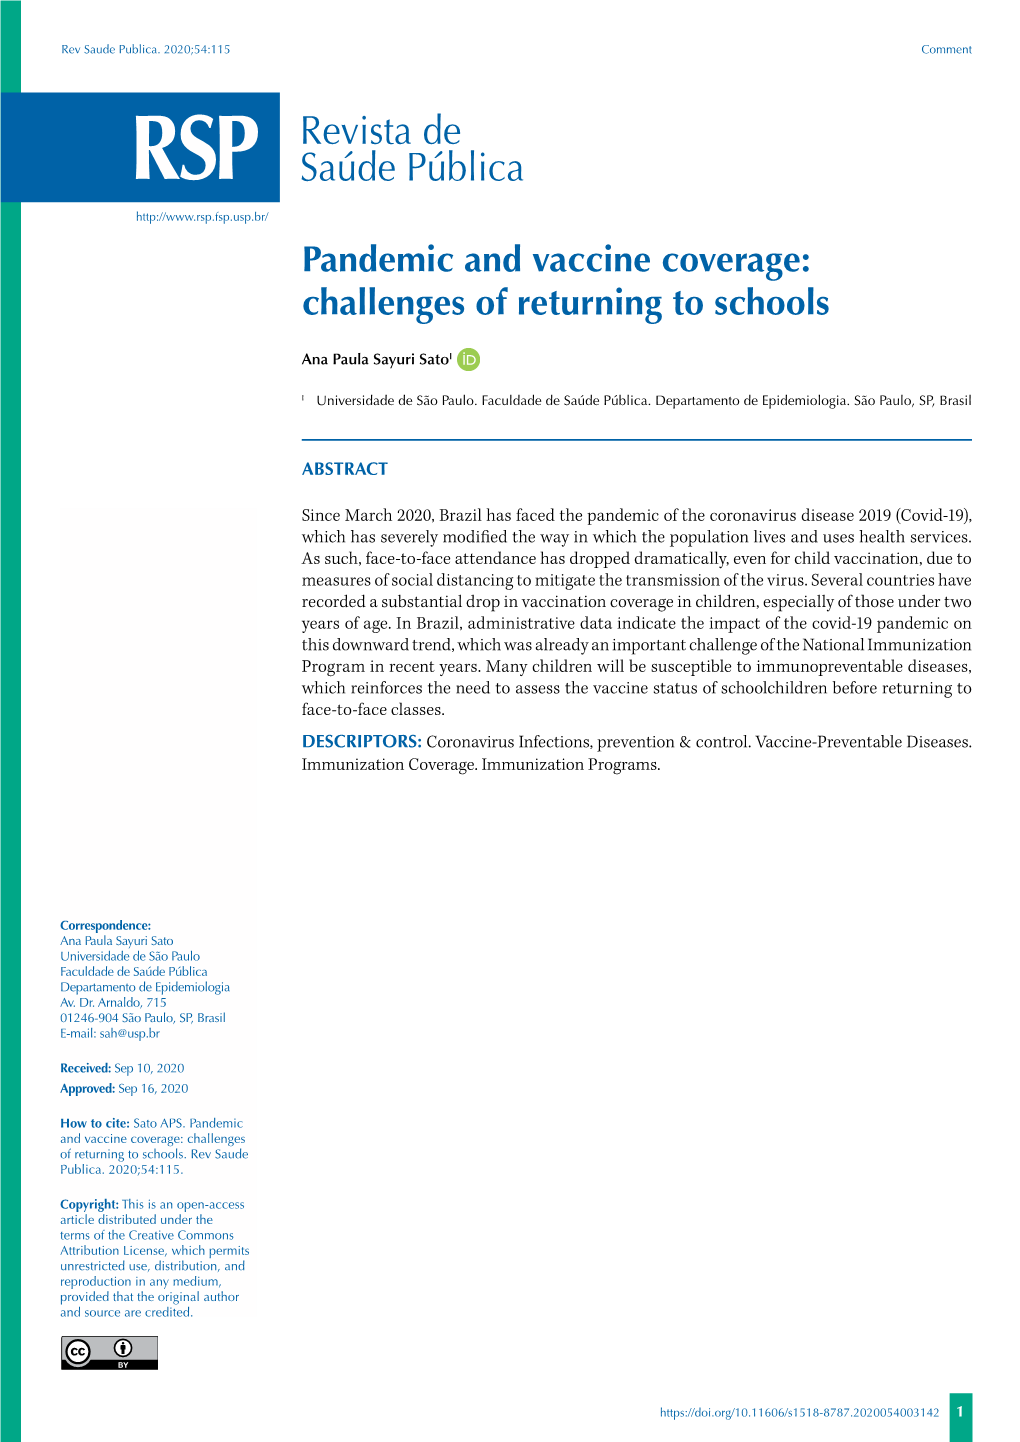 Pandemic and Vaccine Coverage: Challenges of Returning to Schools